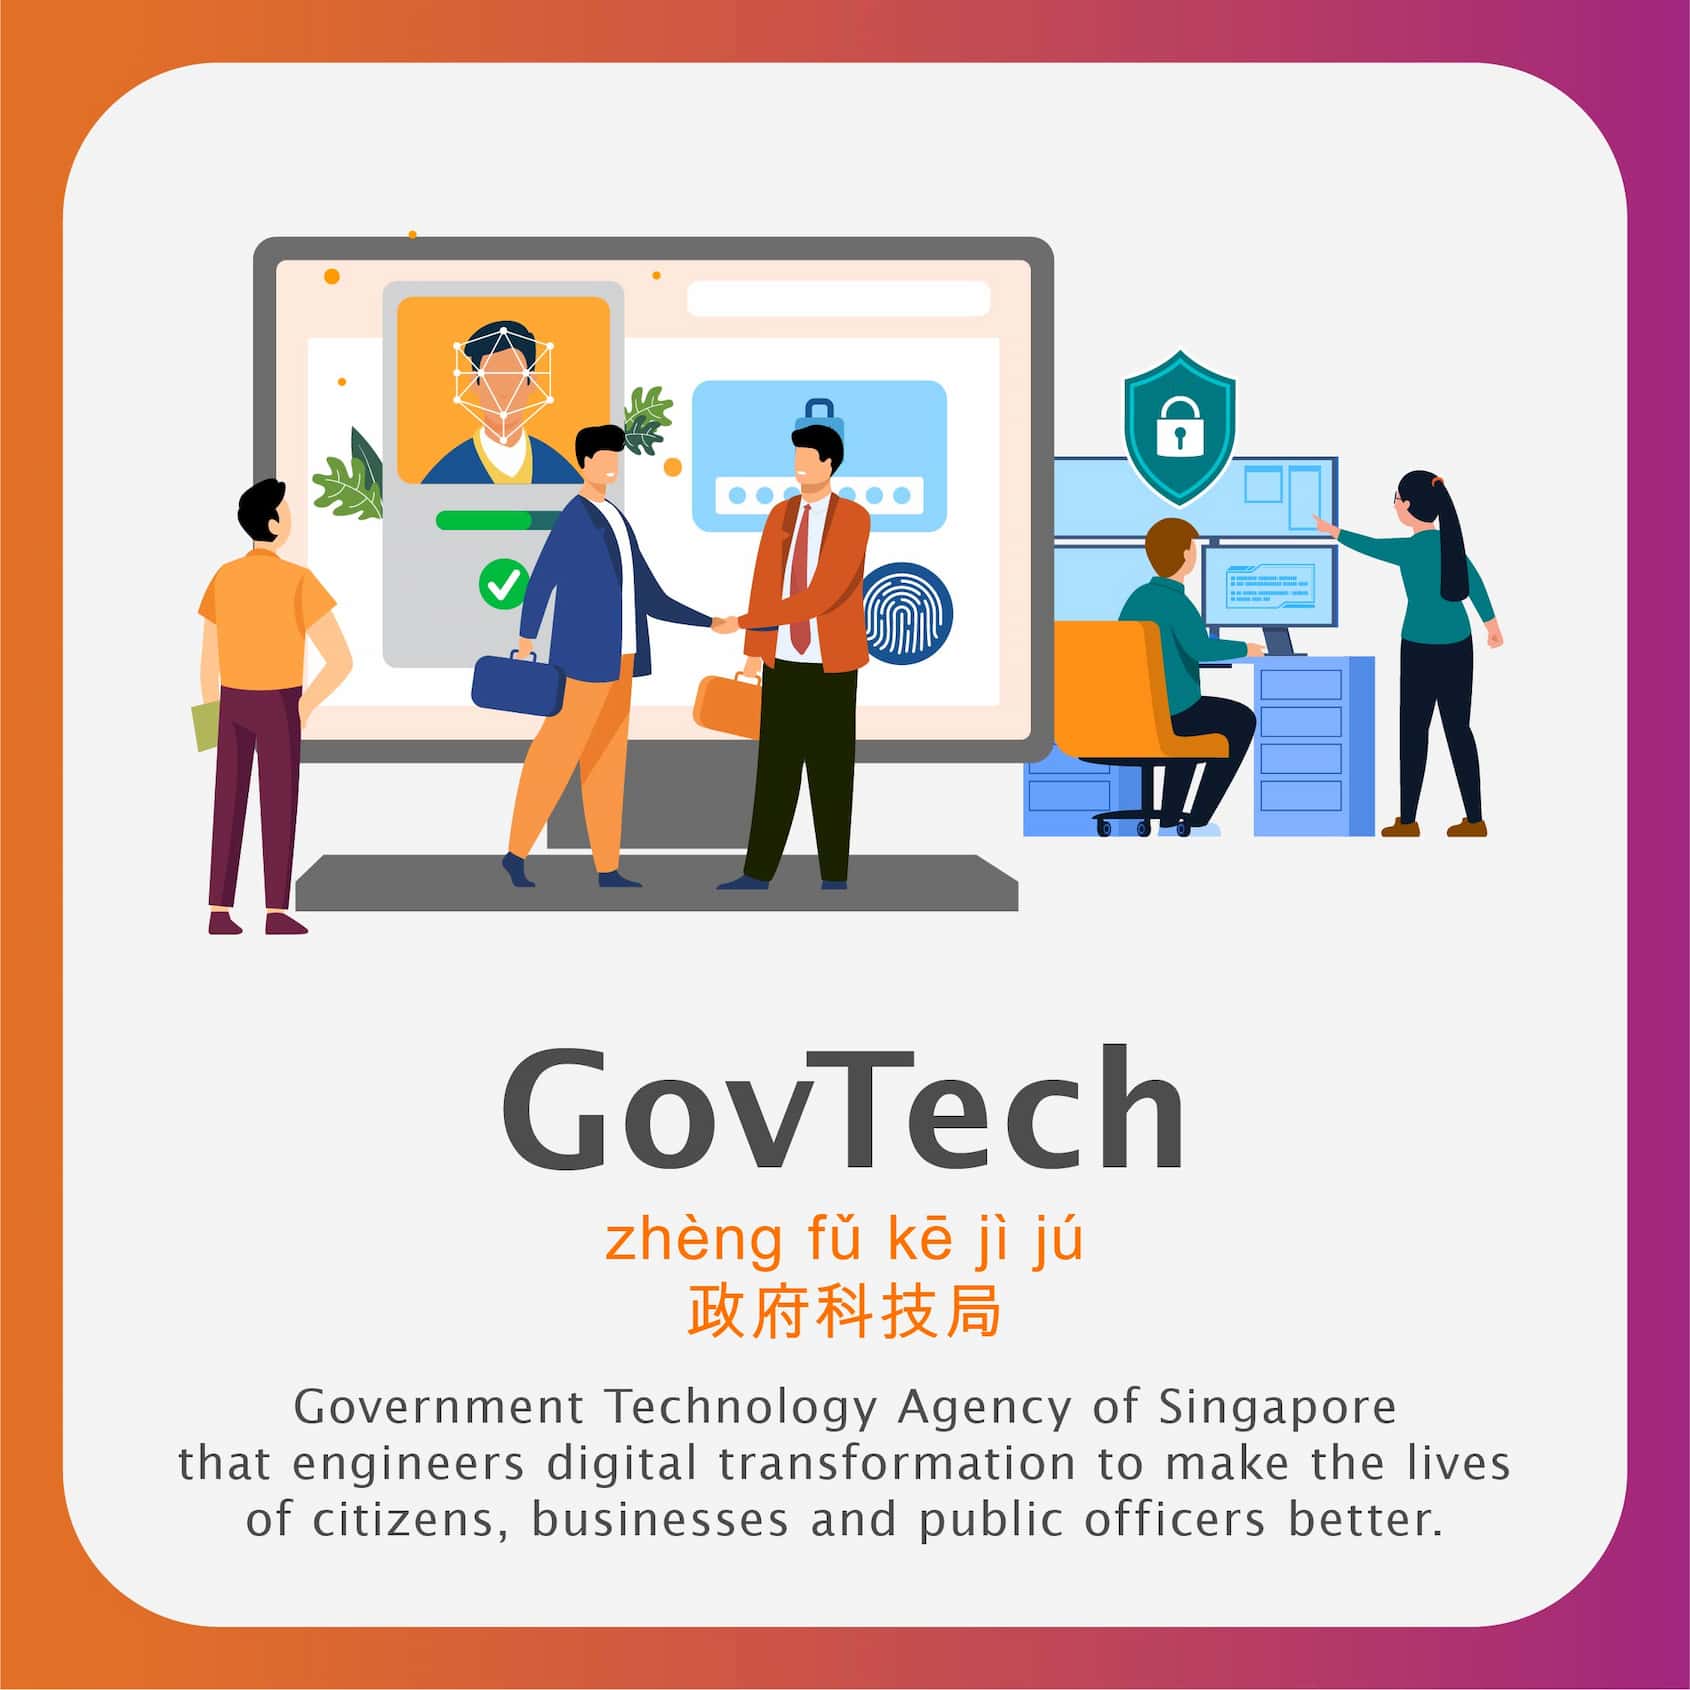 GovTech term in chinese/mandarin and what GovTech is